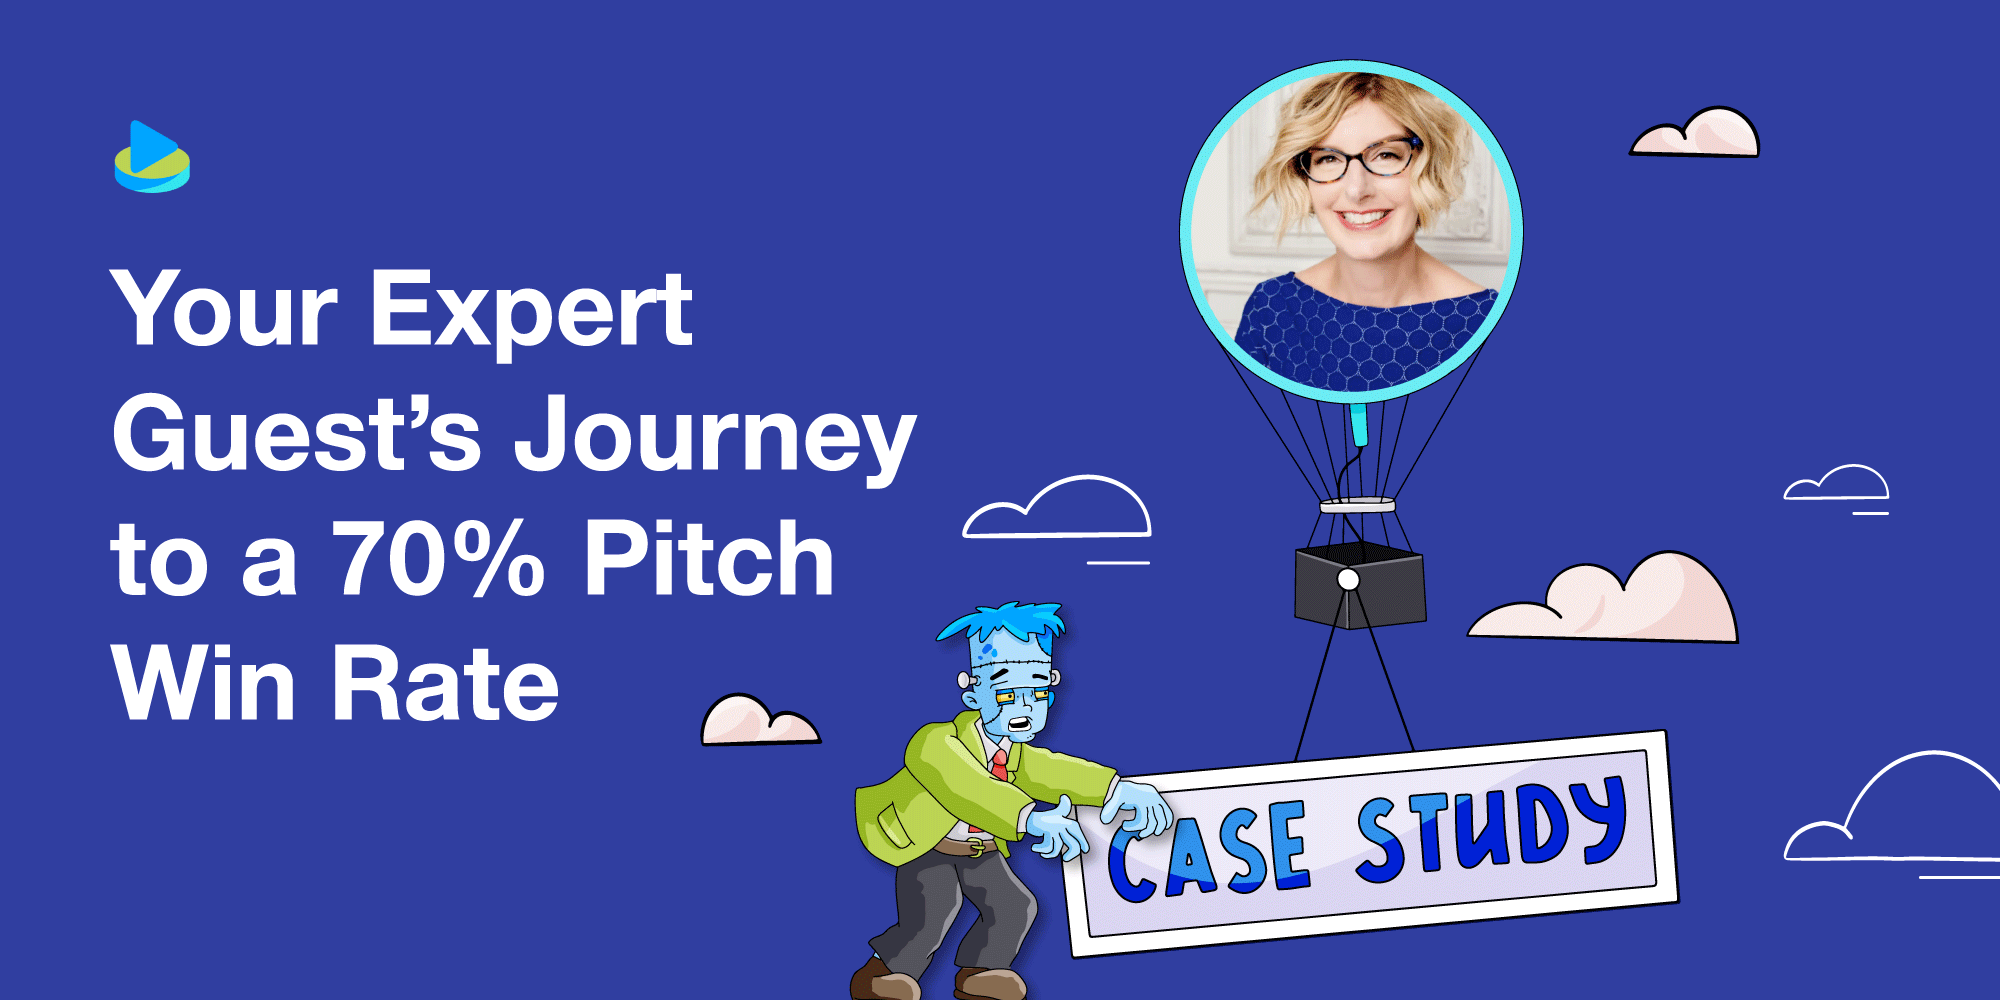 Your Expert Guest's Journey to a 70% Pitch Win Rate